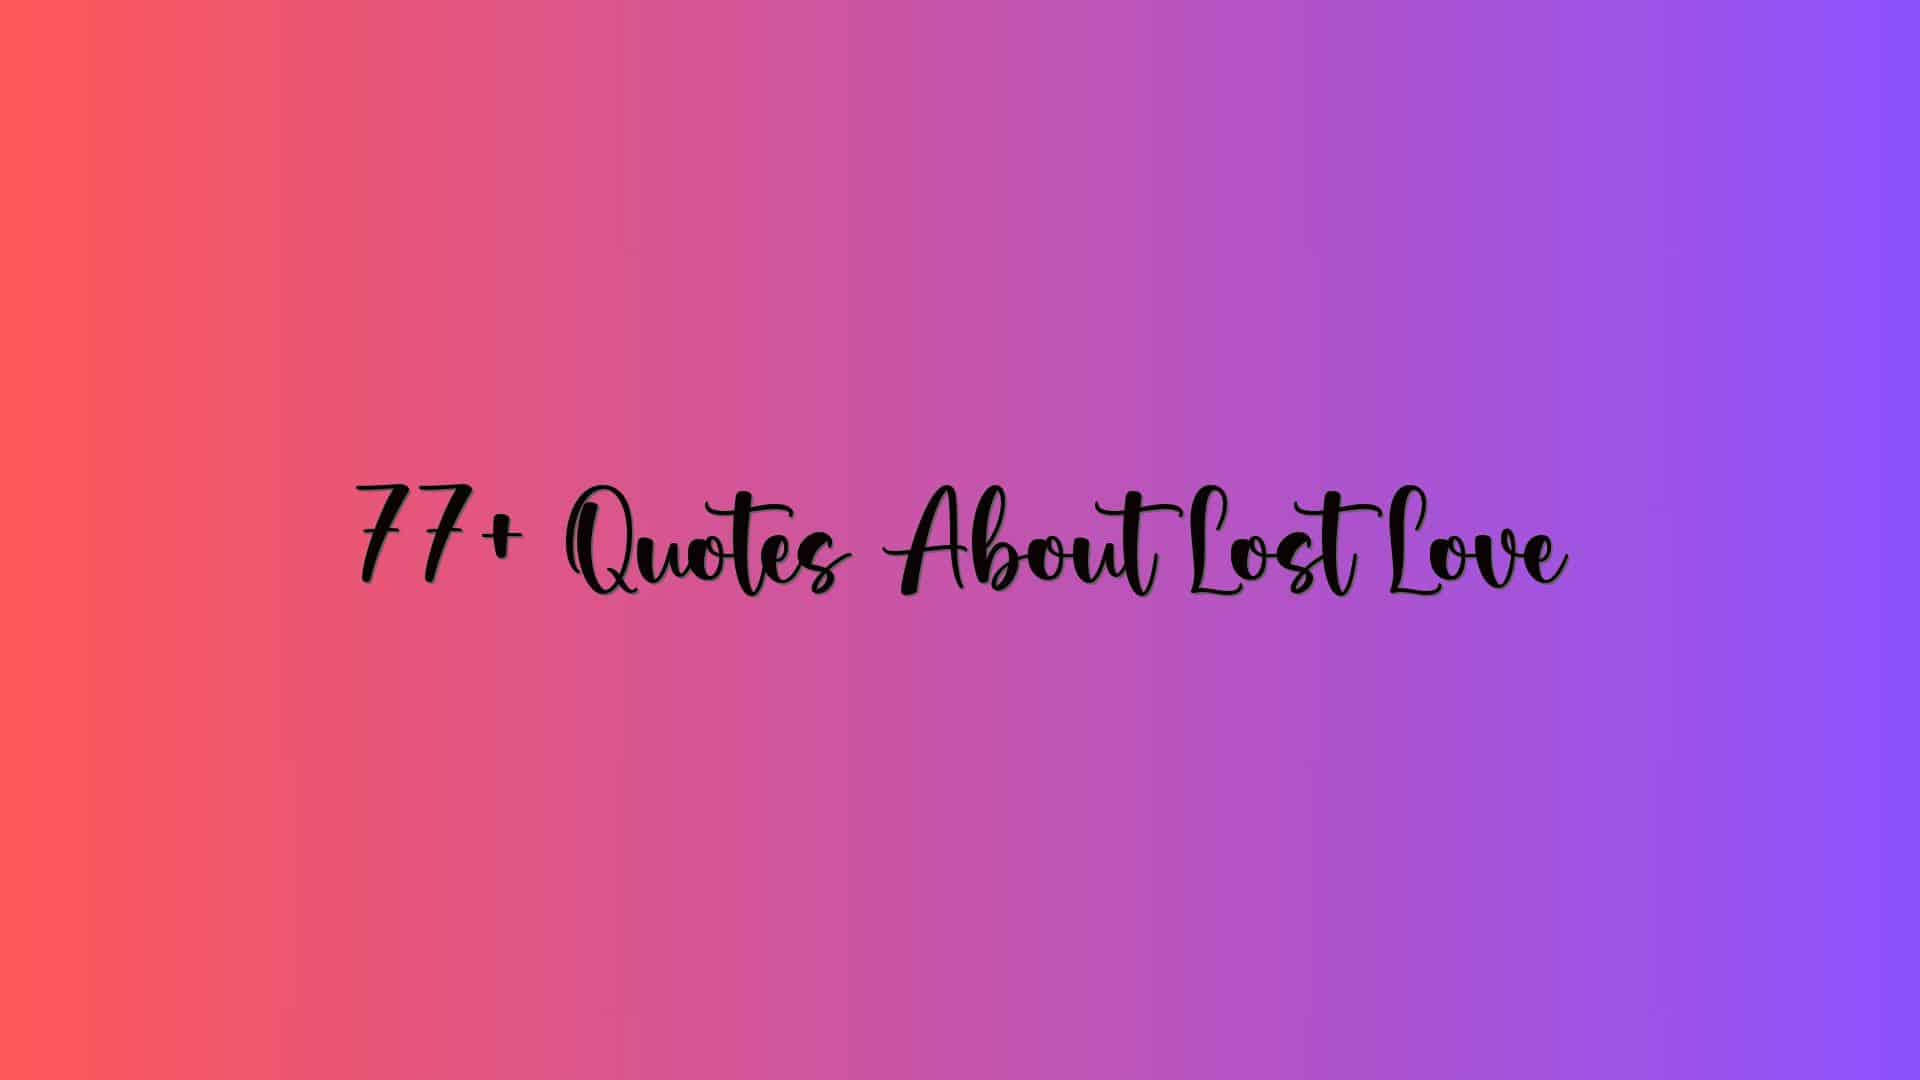 77+ Quotes About Lost Love